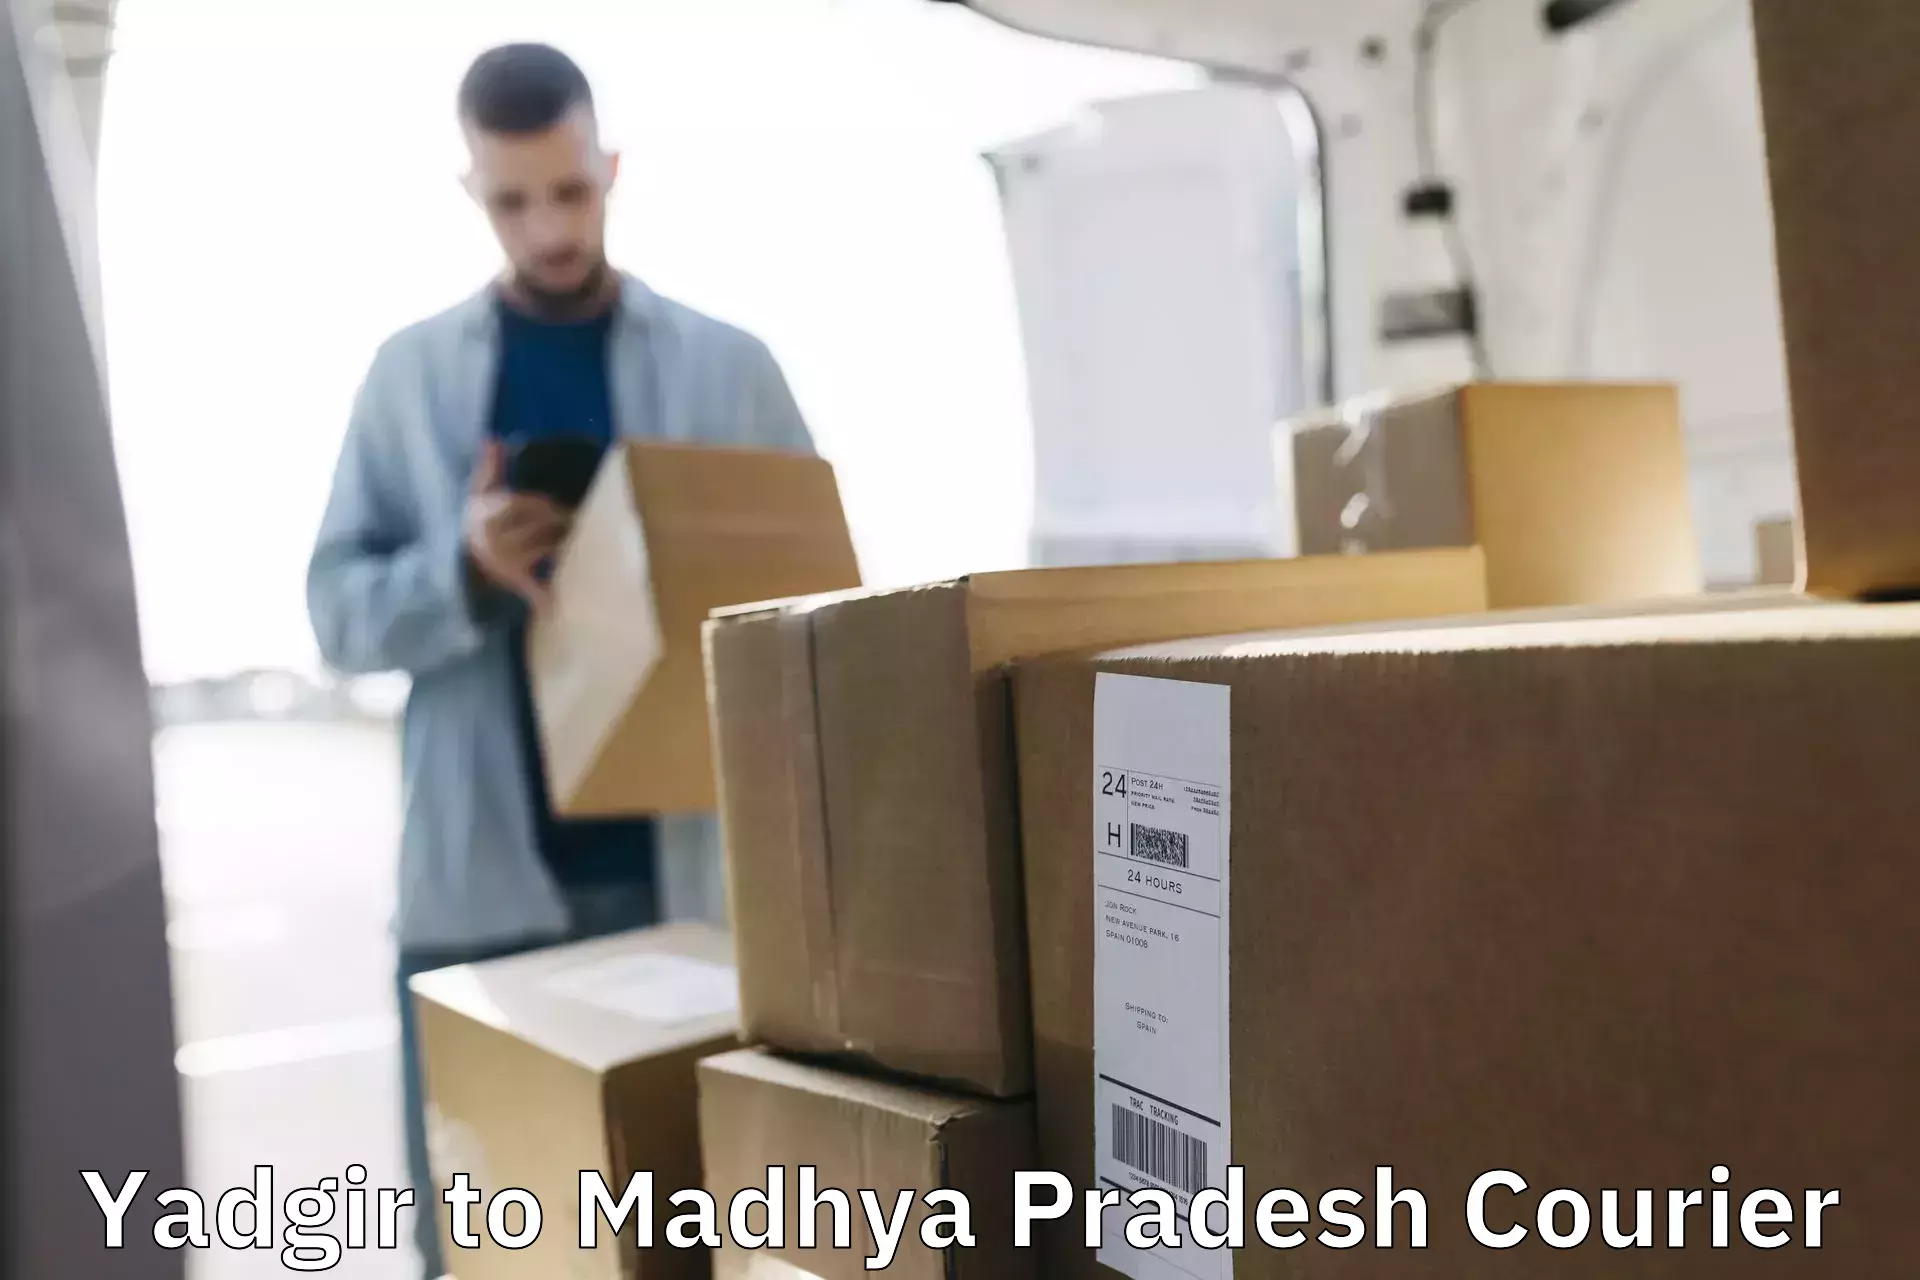 Modern delivery technologies Yadgir to Indore